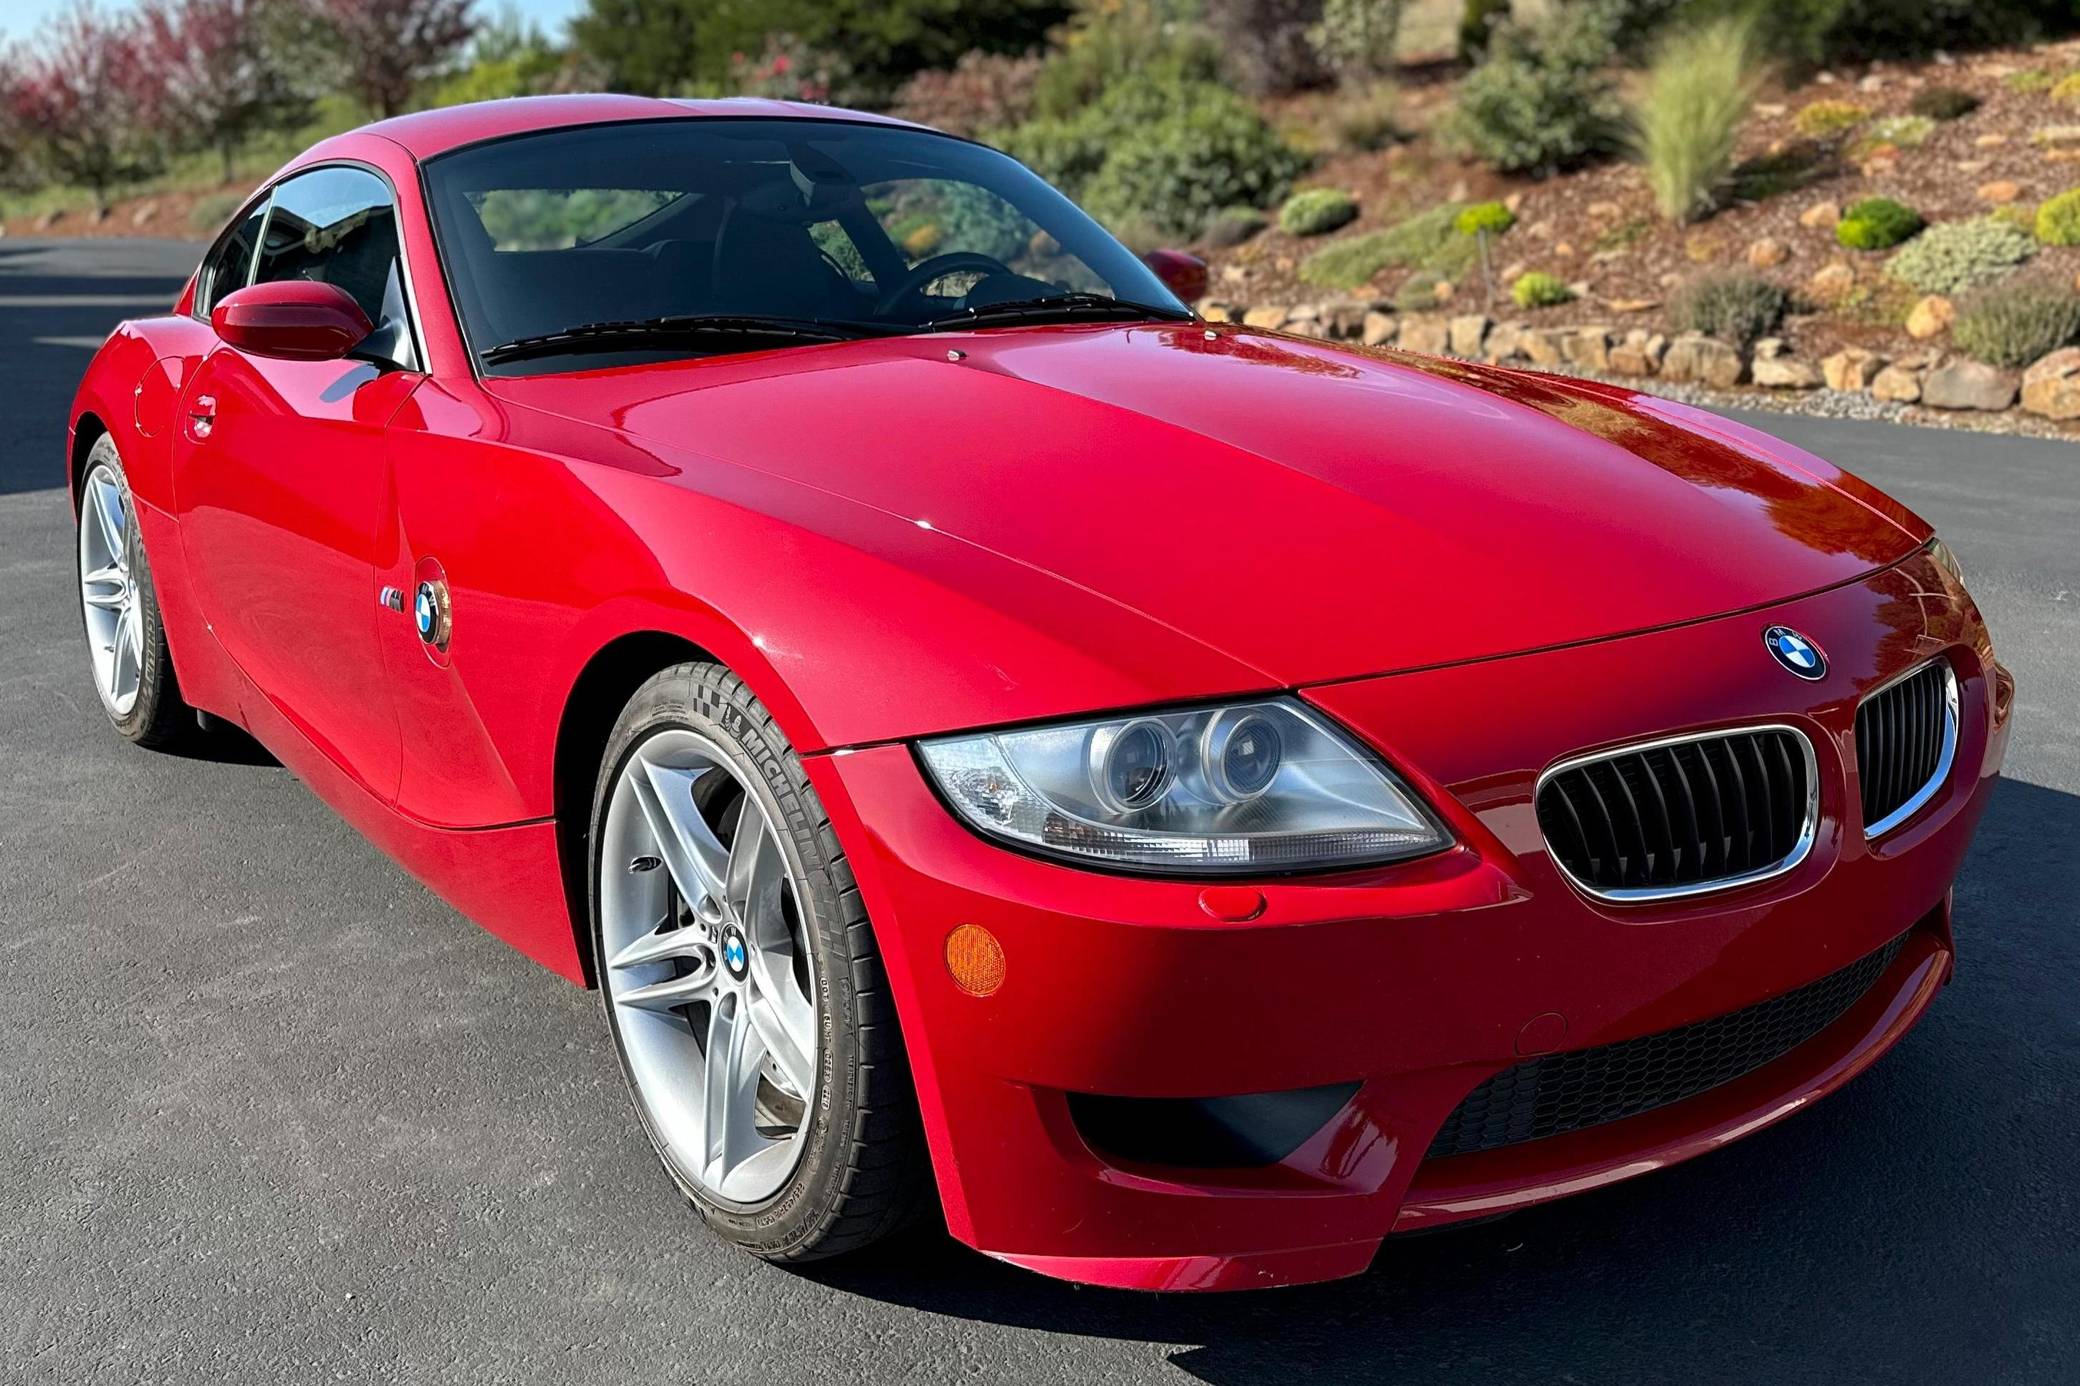 BMW Z4 buyer's guide: what to pay and what to look for